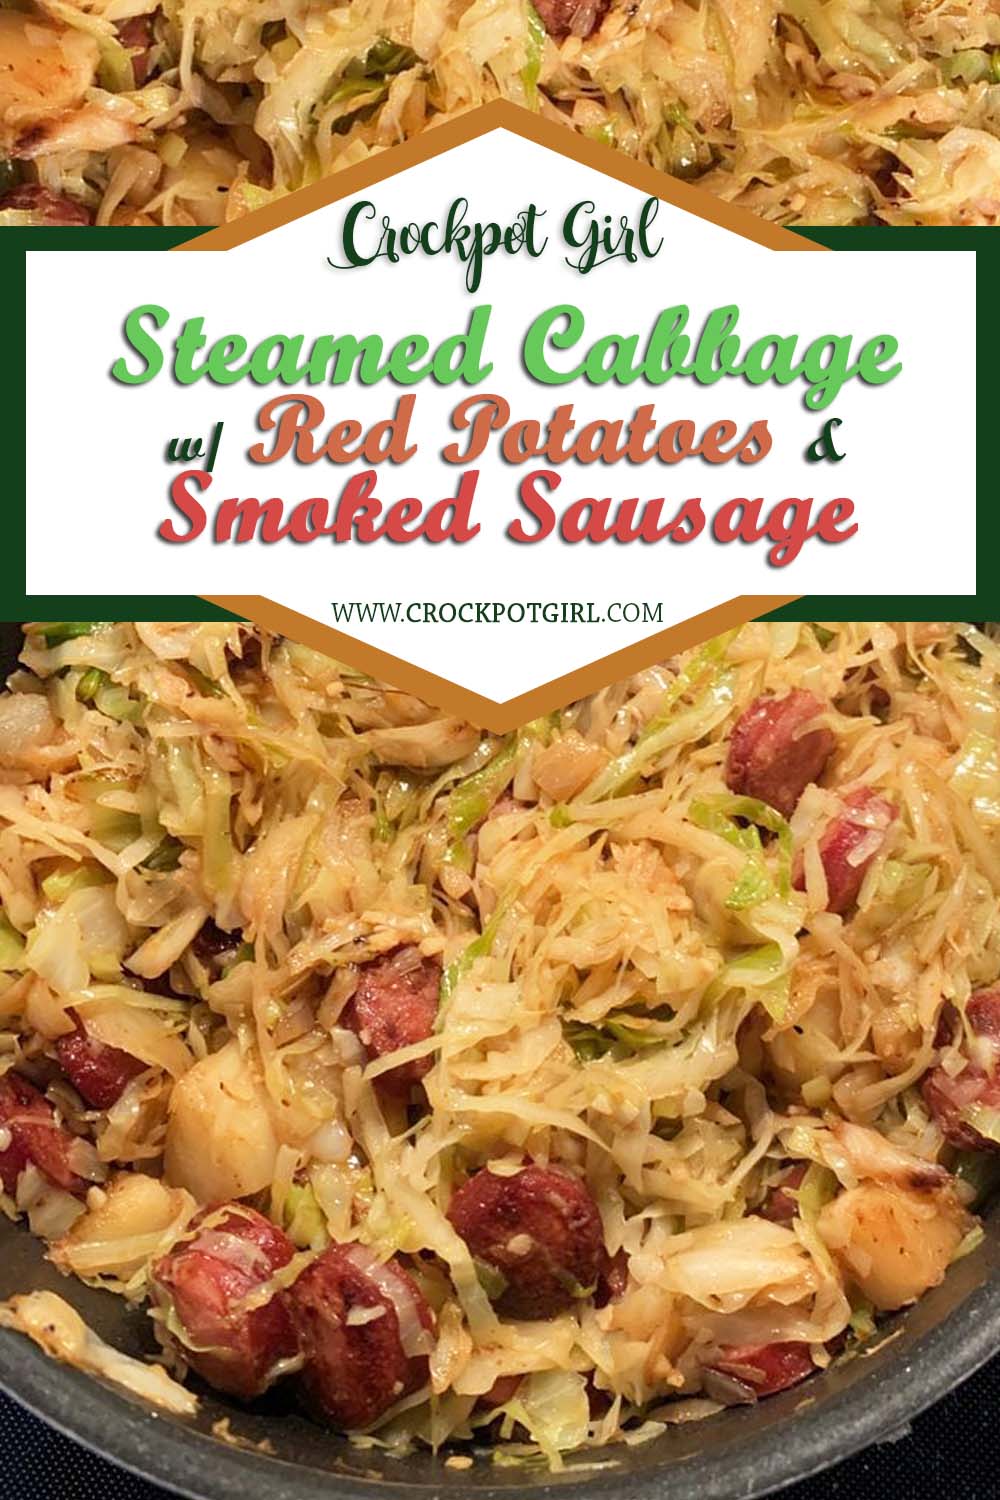 Steamed Cabbage with Red Potatoes and Smoked Sausage Recipe